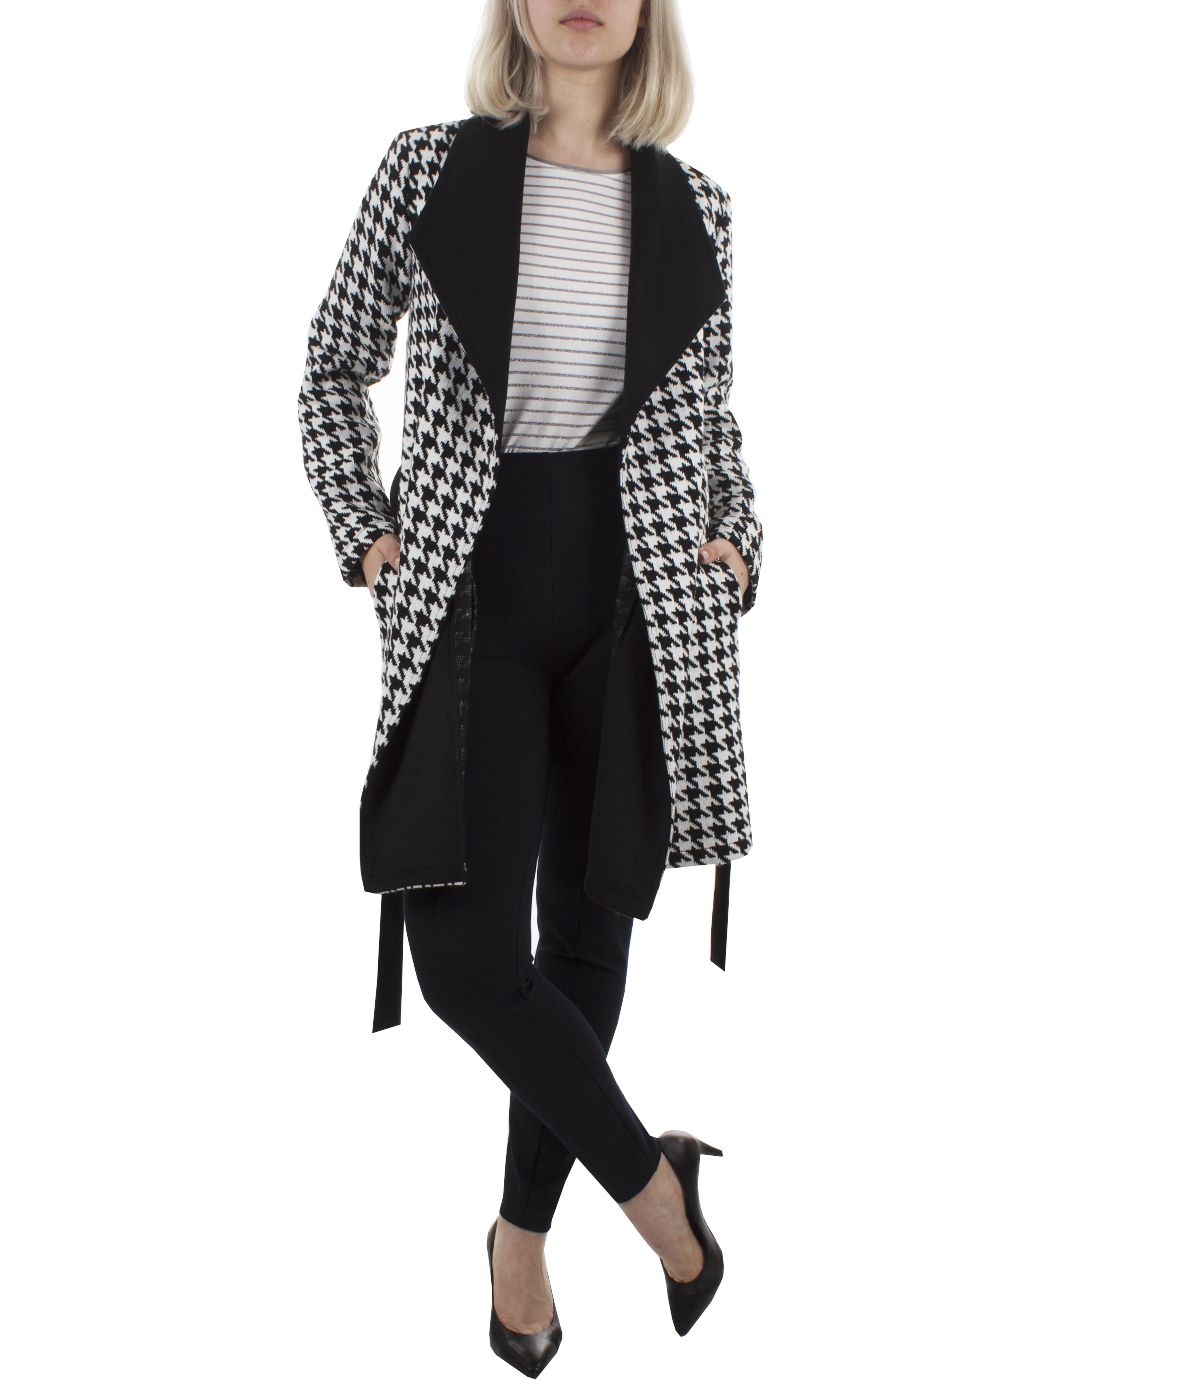 Acrylic wrap-around jacket with contrasting belt and lapel and houndstooth print 3